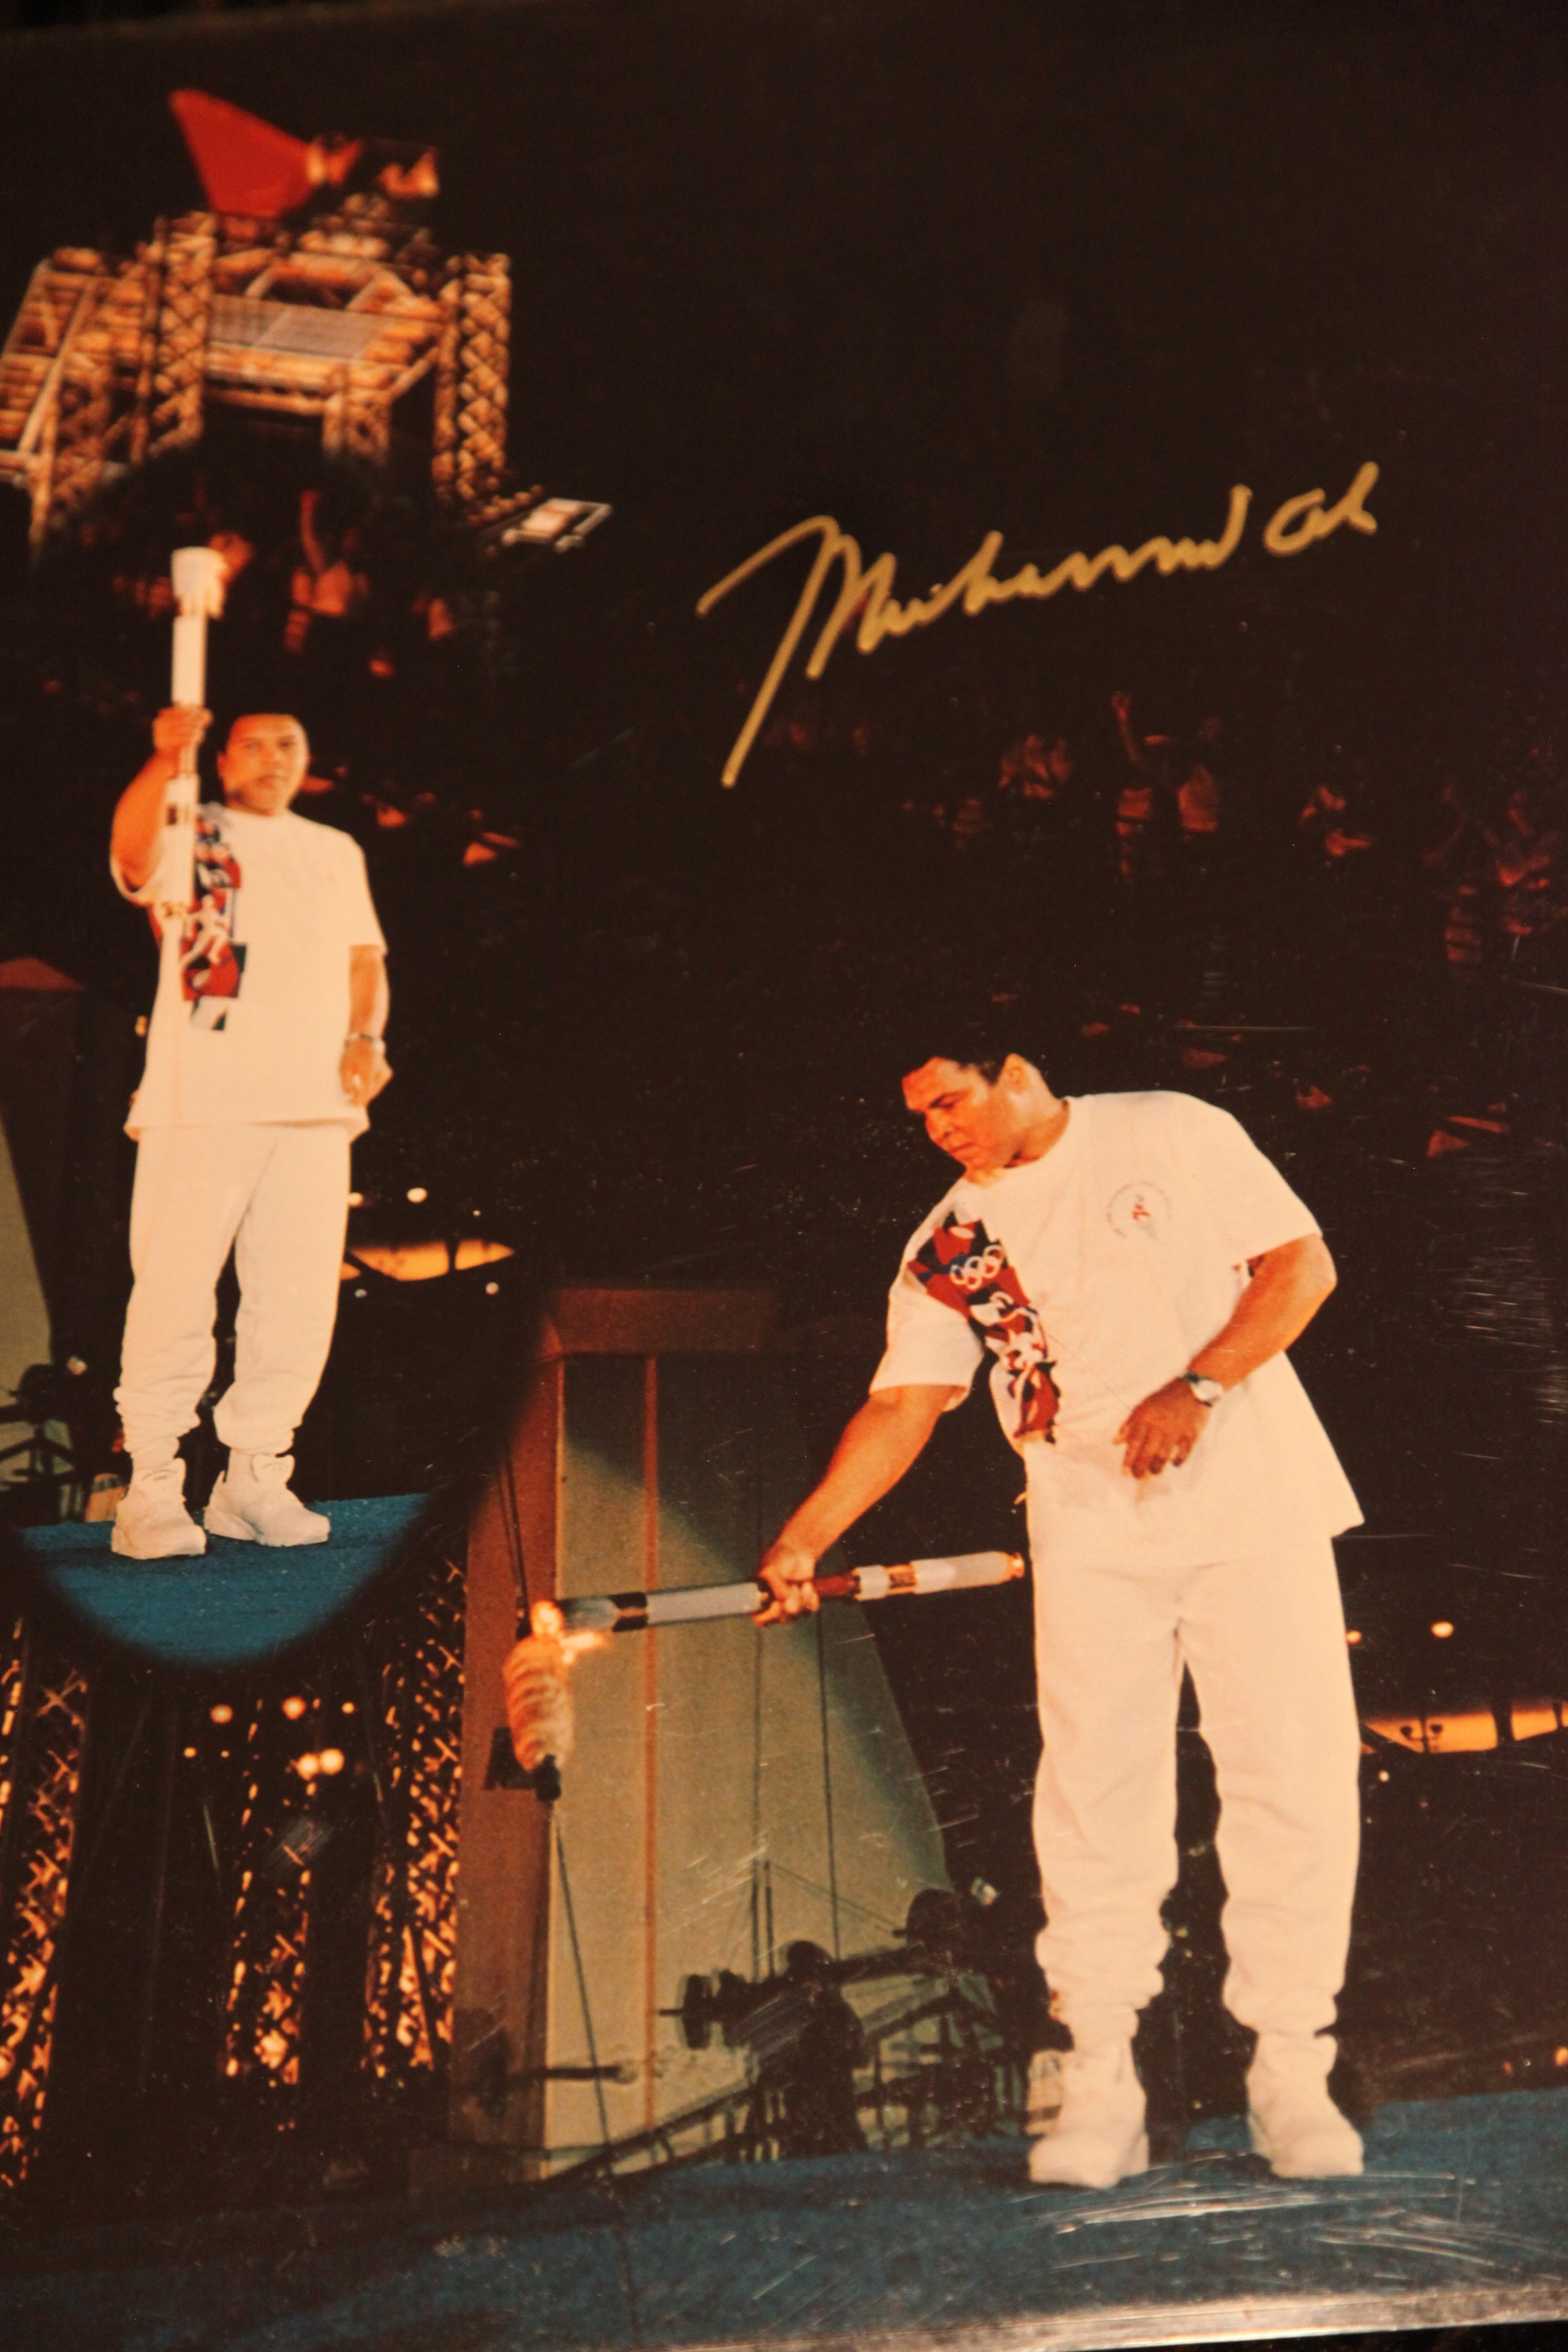 Signed 16x20 mint condition copy of Muhammad Ali lighting the Olympic Torch at the 1996 Olympic Ceremony in Atlanta